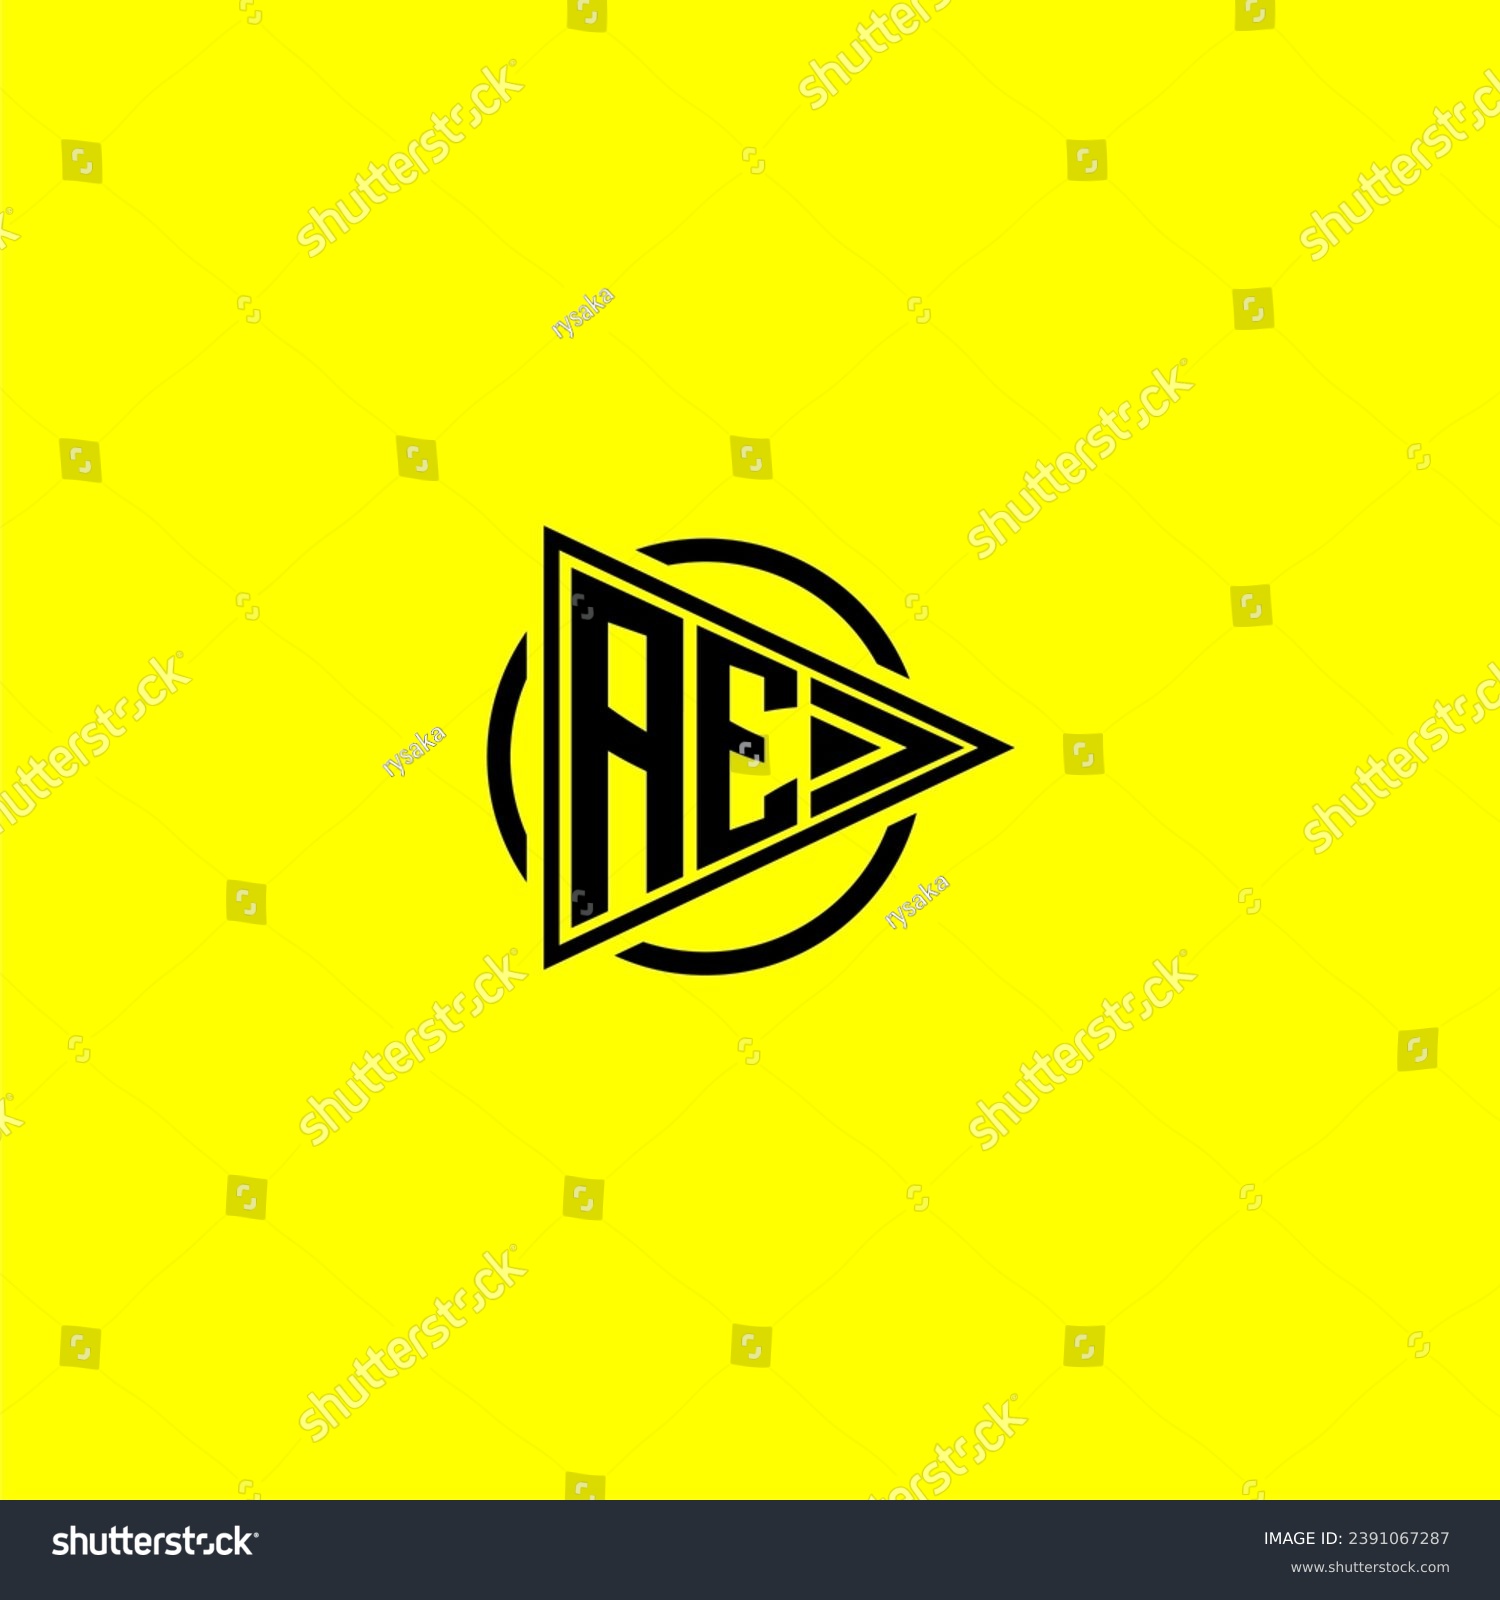 SVG of AE initial monogram logo with triangle style design svg